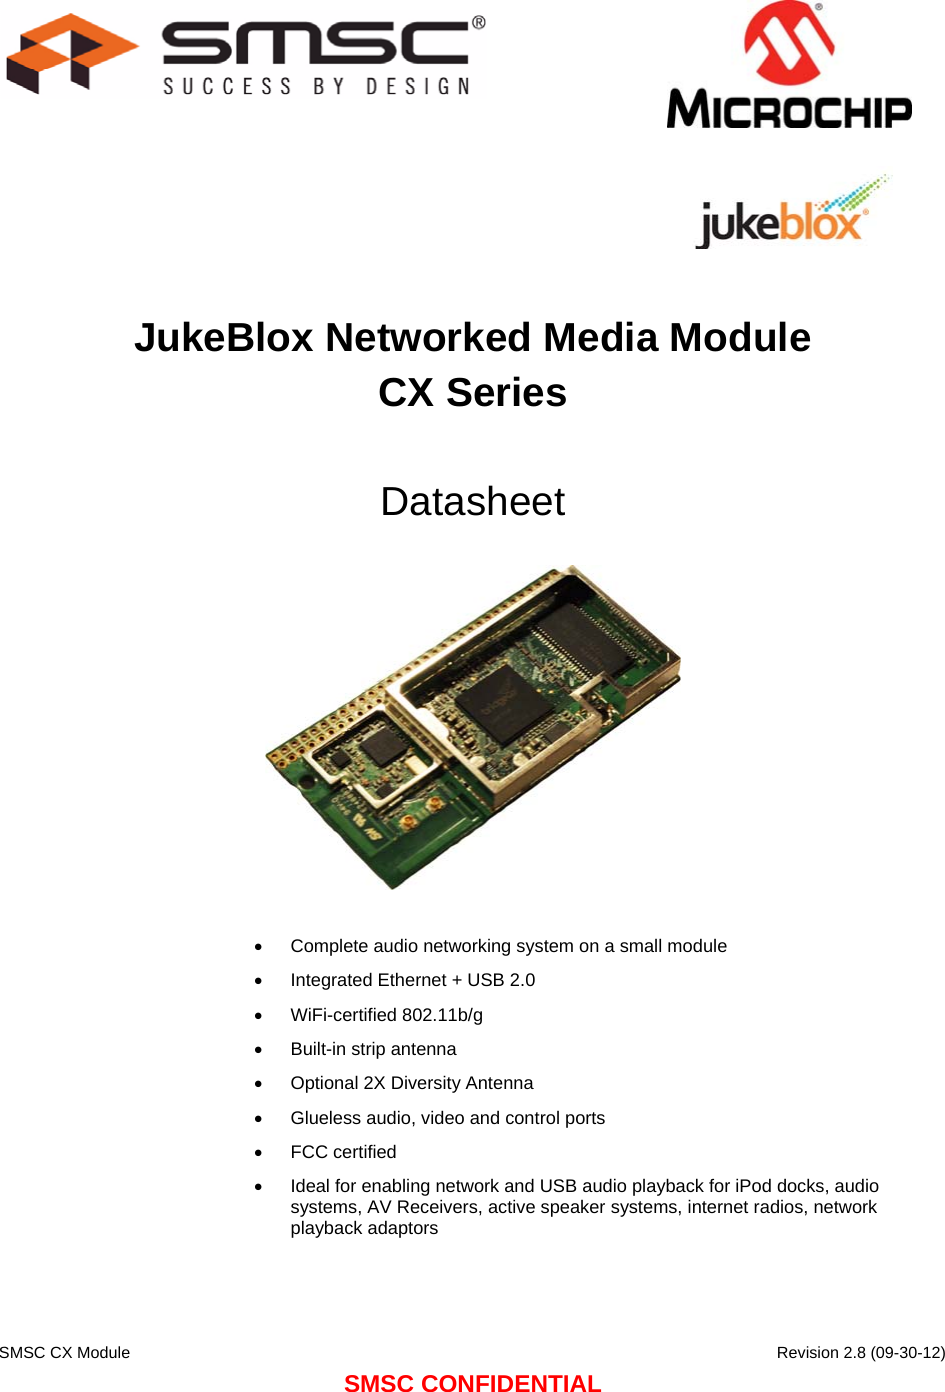    SMSC CX Module      Revision 2.8 (09-30-12) SMSC CONFIDENTIAL                                   JukeBlox Networked Media Module CX Series  Datasheet     Complete audio networking system on a small module  Integrated Ethernet + USB 2.0  WiFi-certified 802.11b/g  Built-in strip antenna  Optional 2X Diversity Antenna  Glueless audio, video and control ports  FCC certified  Ideal for enabling network and USB audio playback for iPod docks, audio systems, AV Receivers, active speaker systems, internet radios, network playback adaptors  